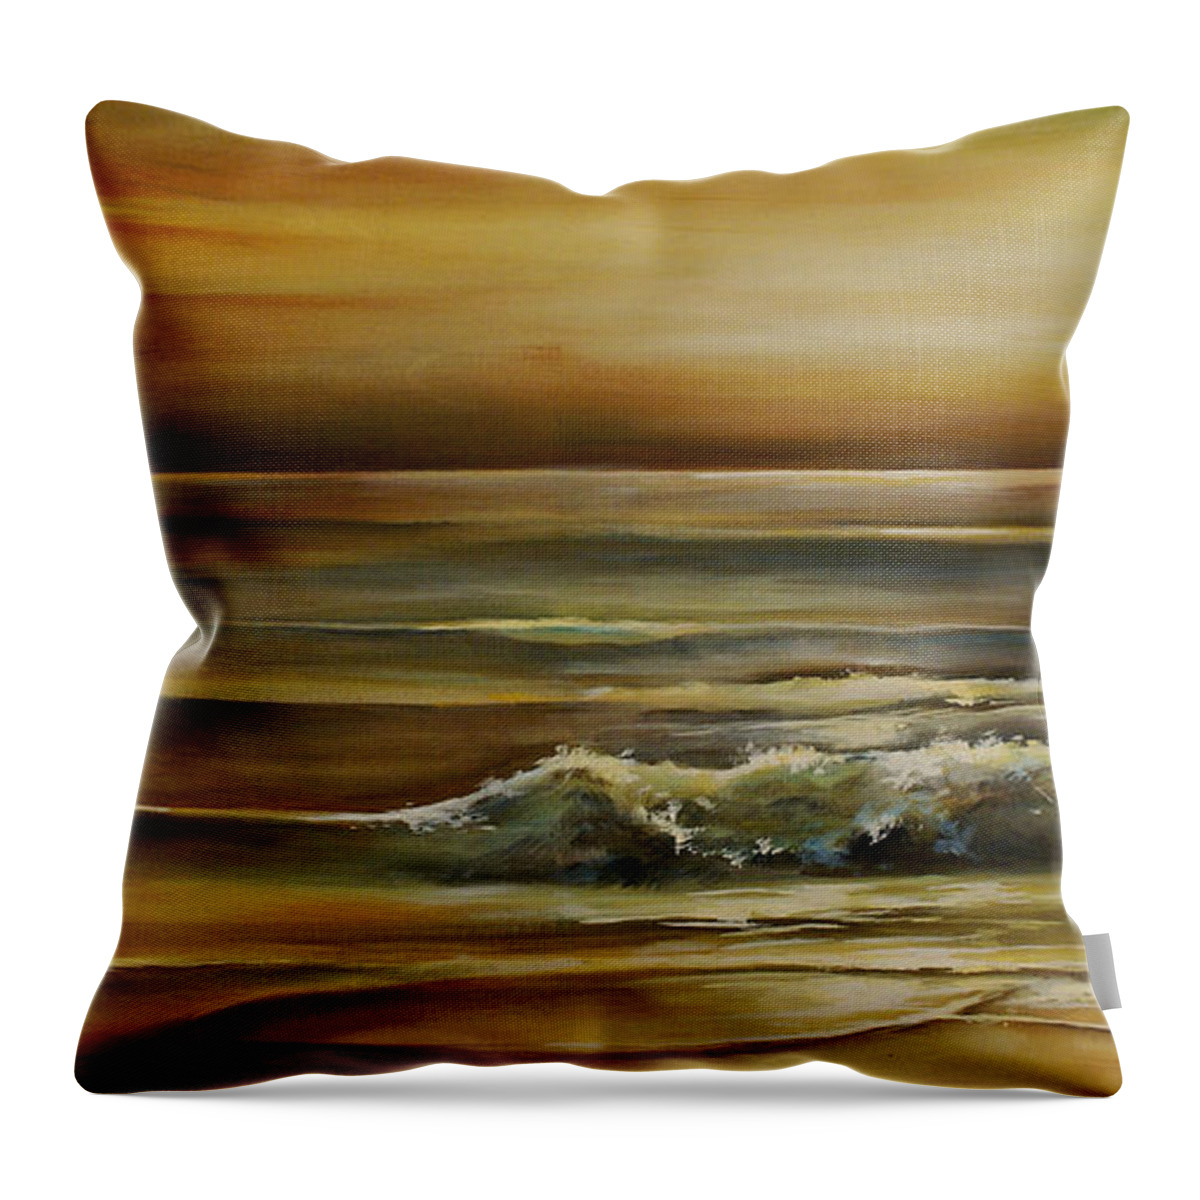 Seascape Throw Pillow featuring the painting Seascape 2 by Michael Lang